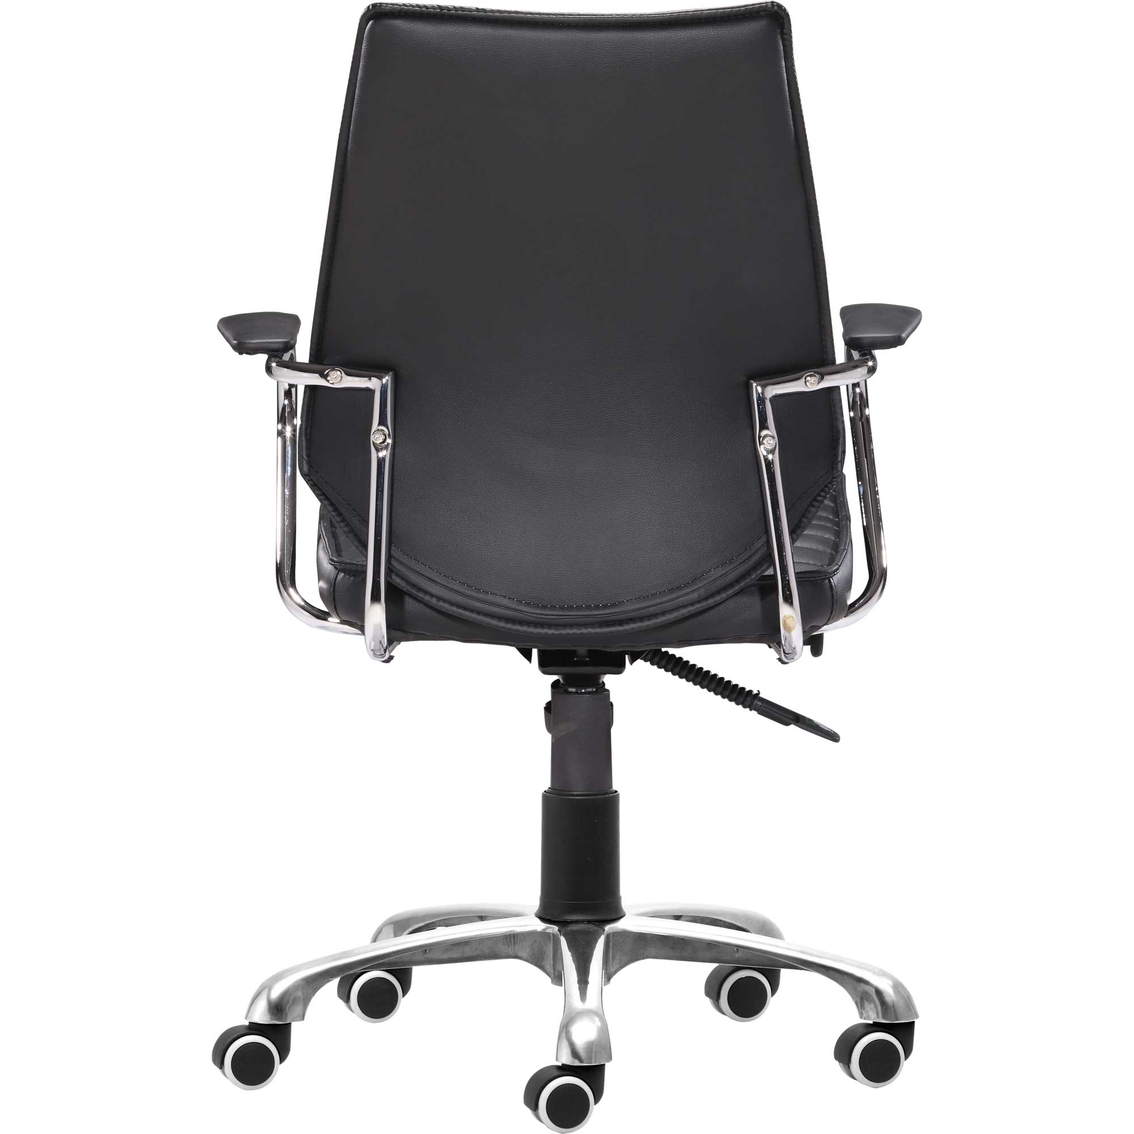 Zuo Modern Enterprise Low Back Office Chair - Image 4 of 7